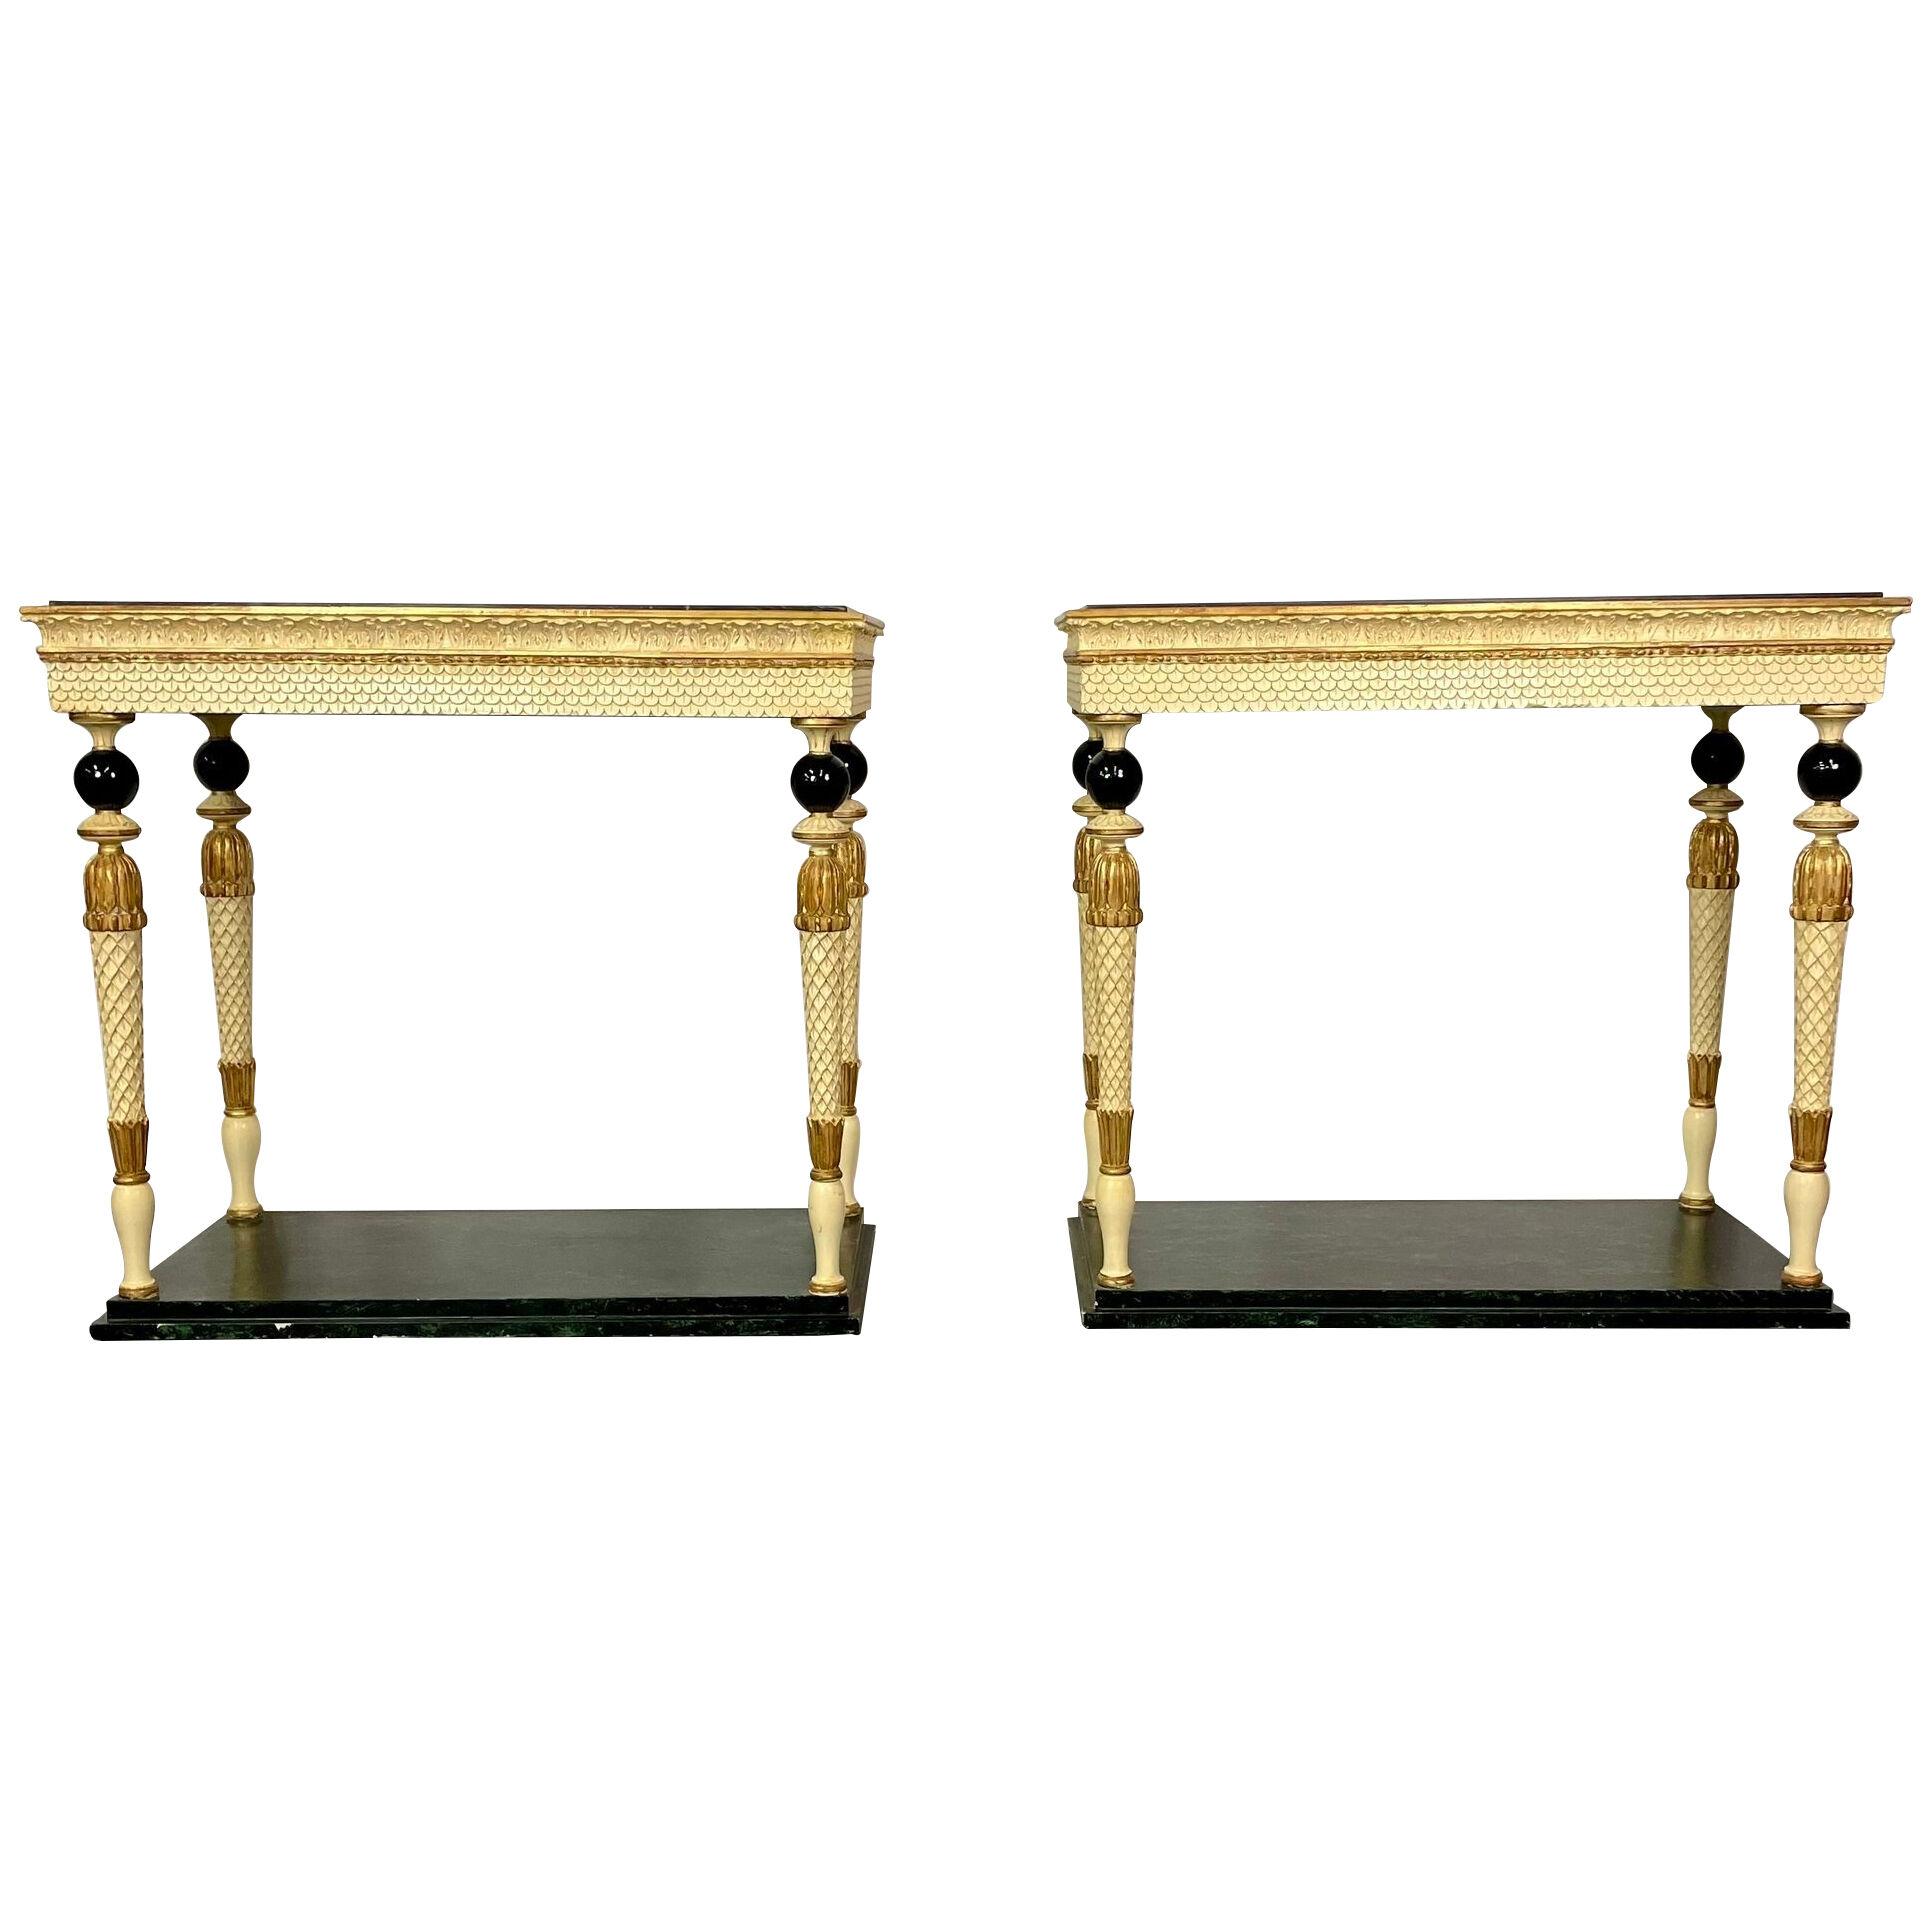 Pair of Maison Jansen Console Tables, Neoclassical, Marble Top, Paint Decorated